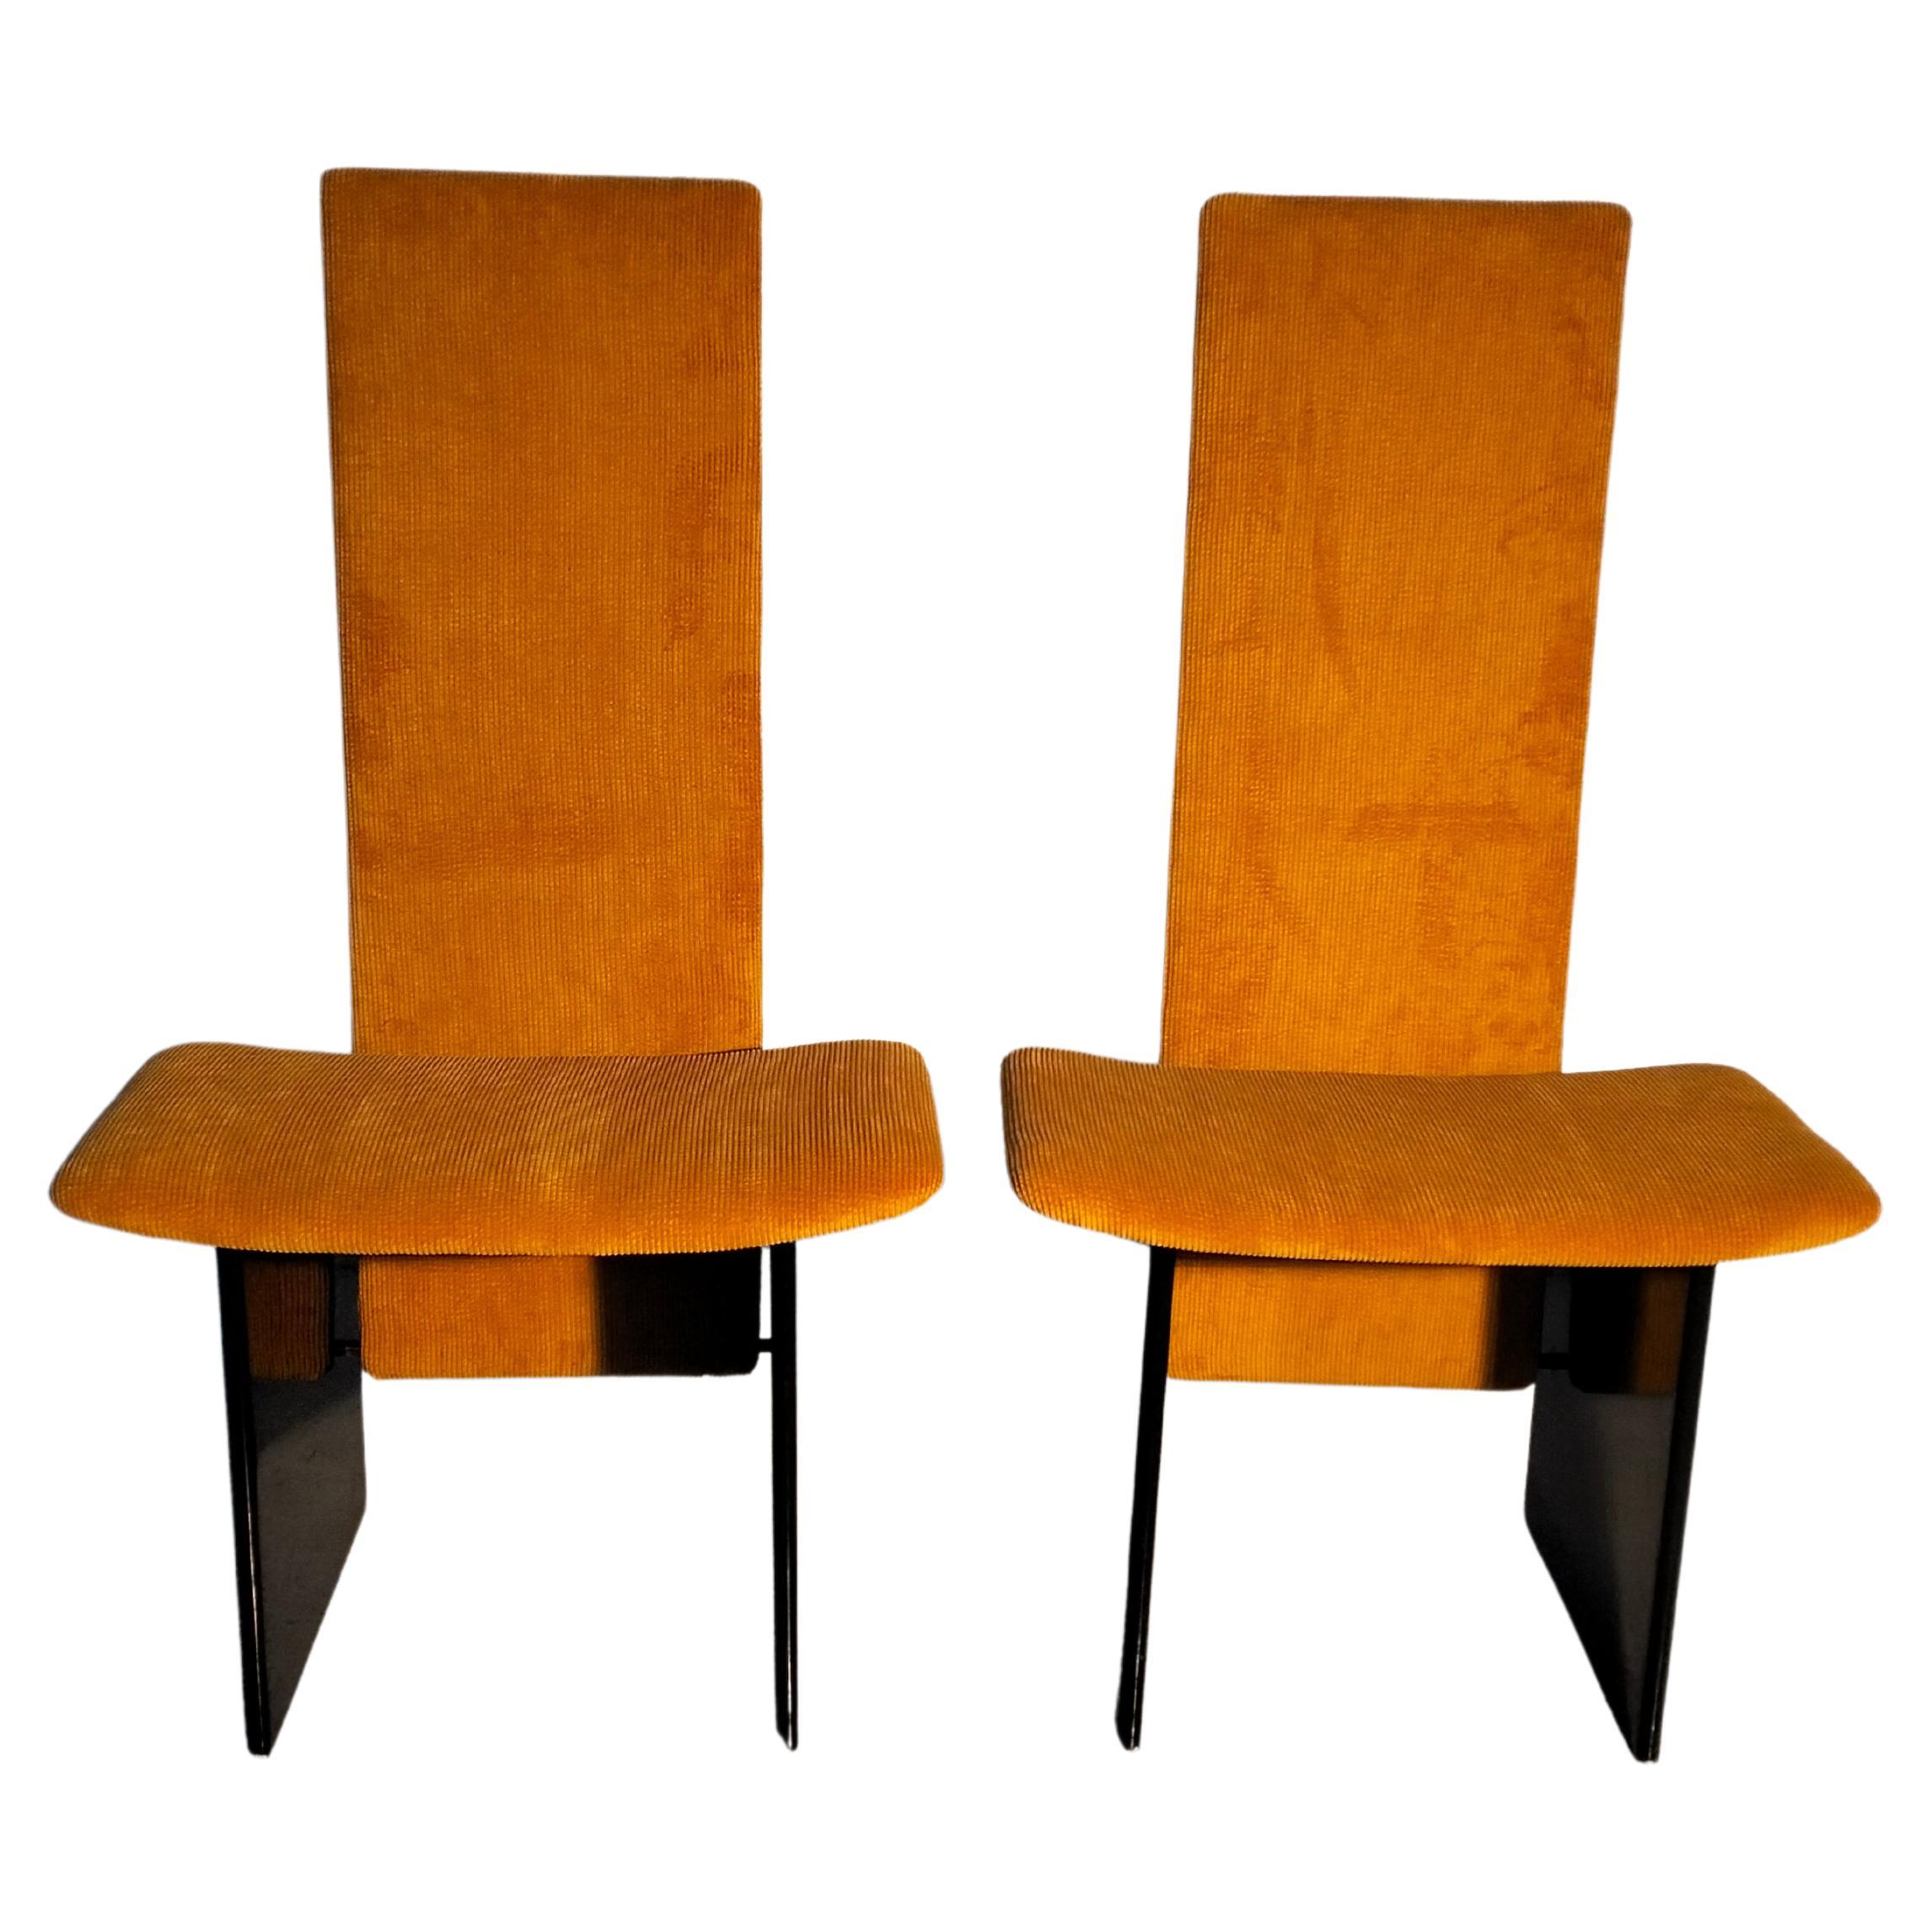 Set of 2 ocra yellow chairs Rennie mod. by K. Takahama for S. Gavina 70's, Italy For Sale